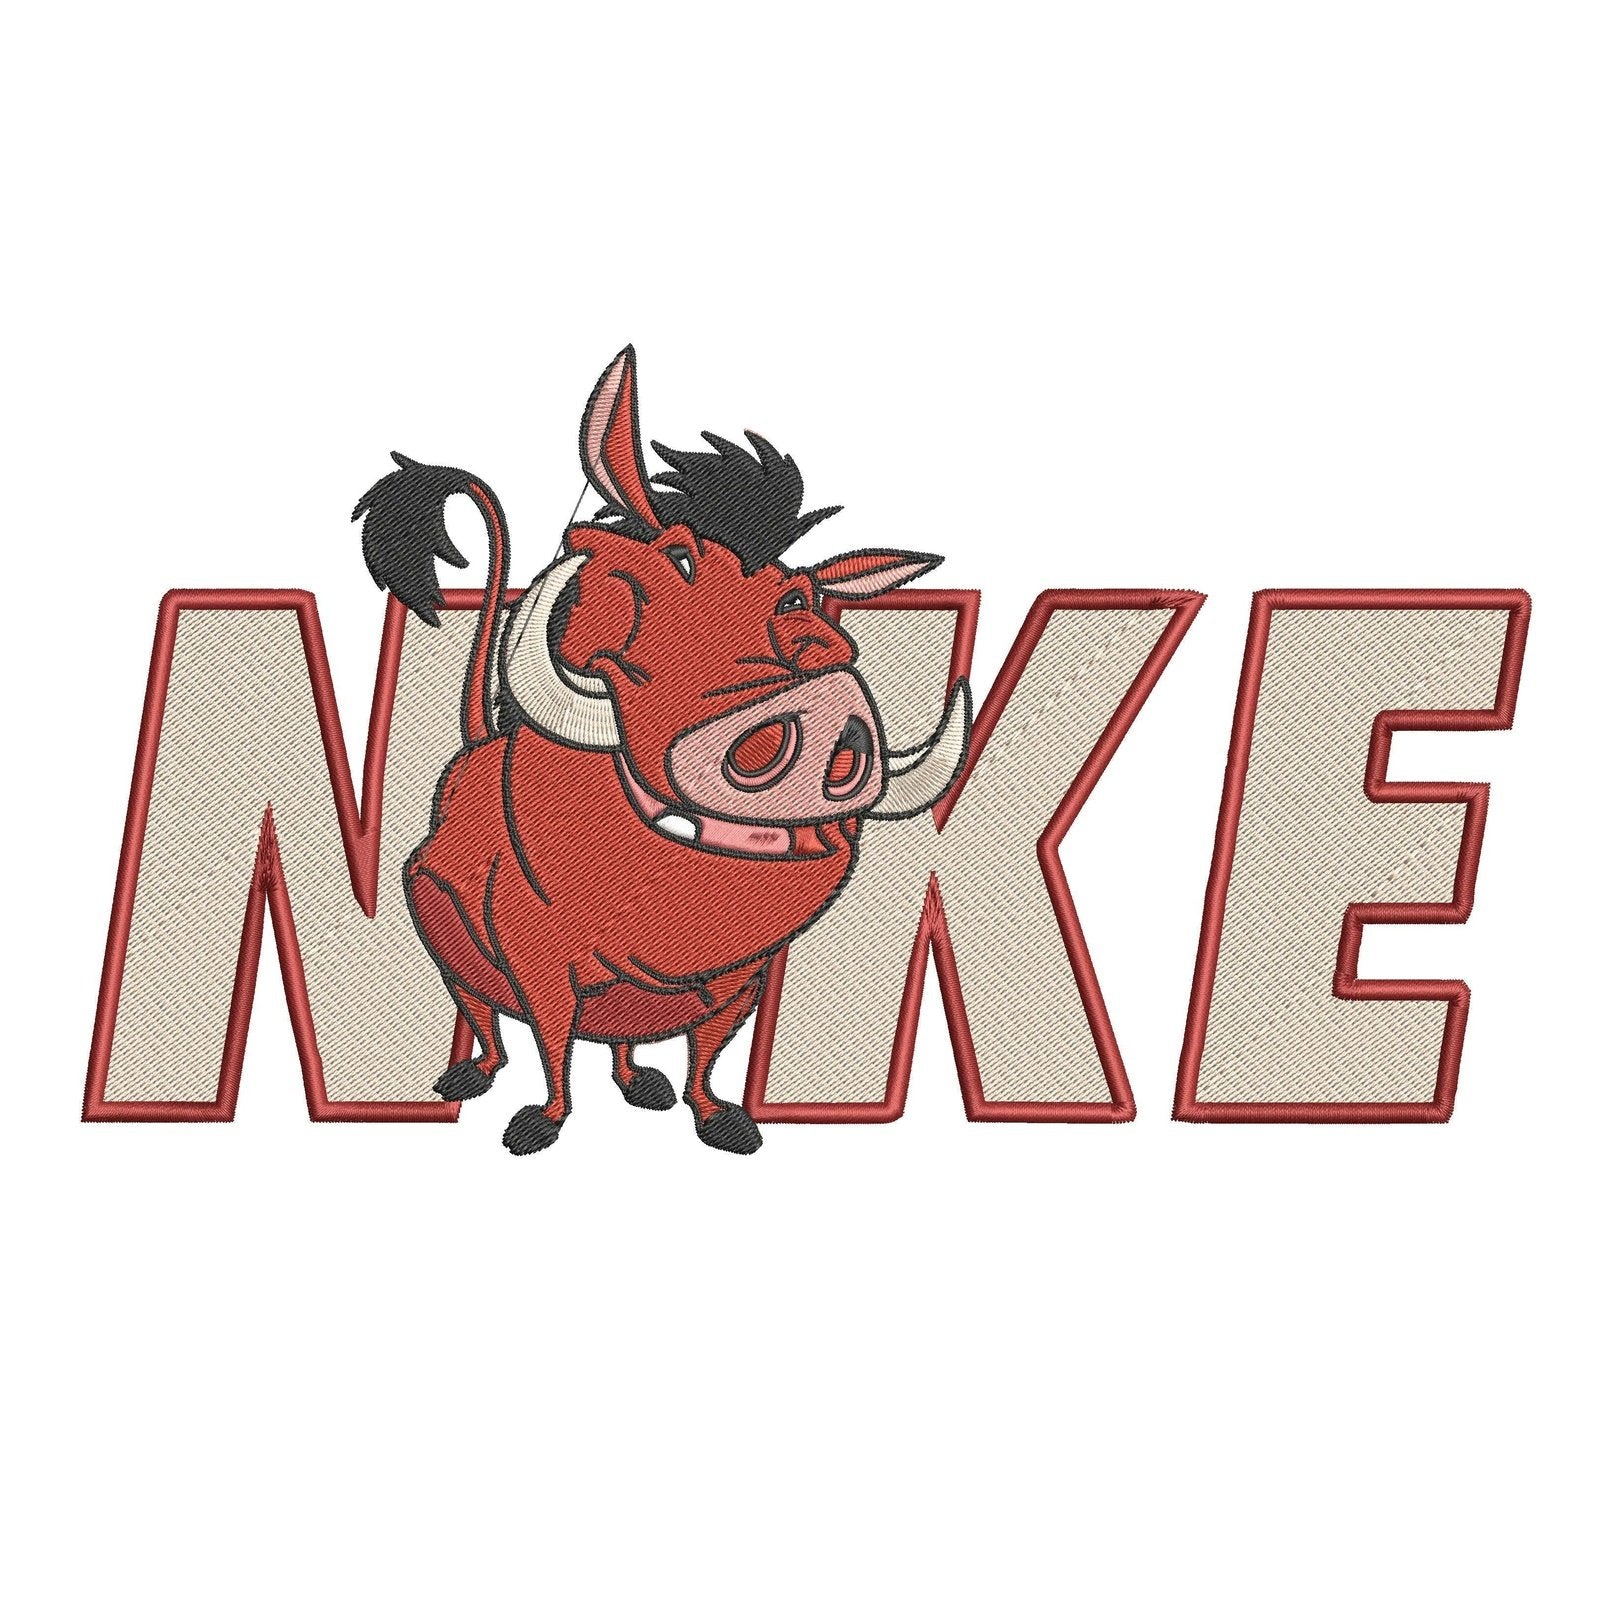 Nike Pumba - The Lion King's Lighthearted Companion - Embroidery Design FineryEmbroidery